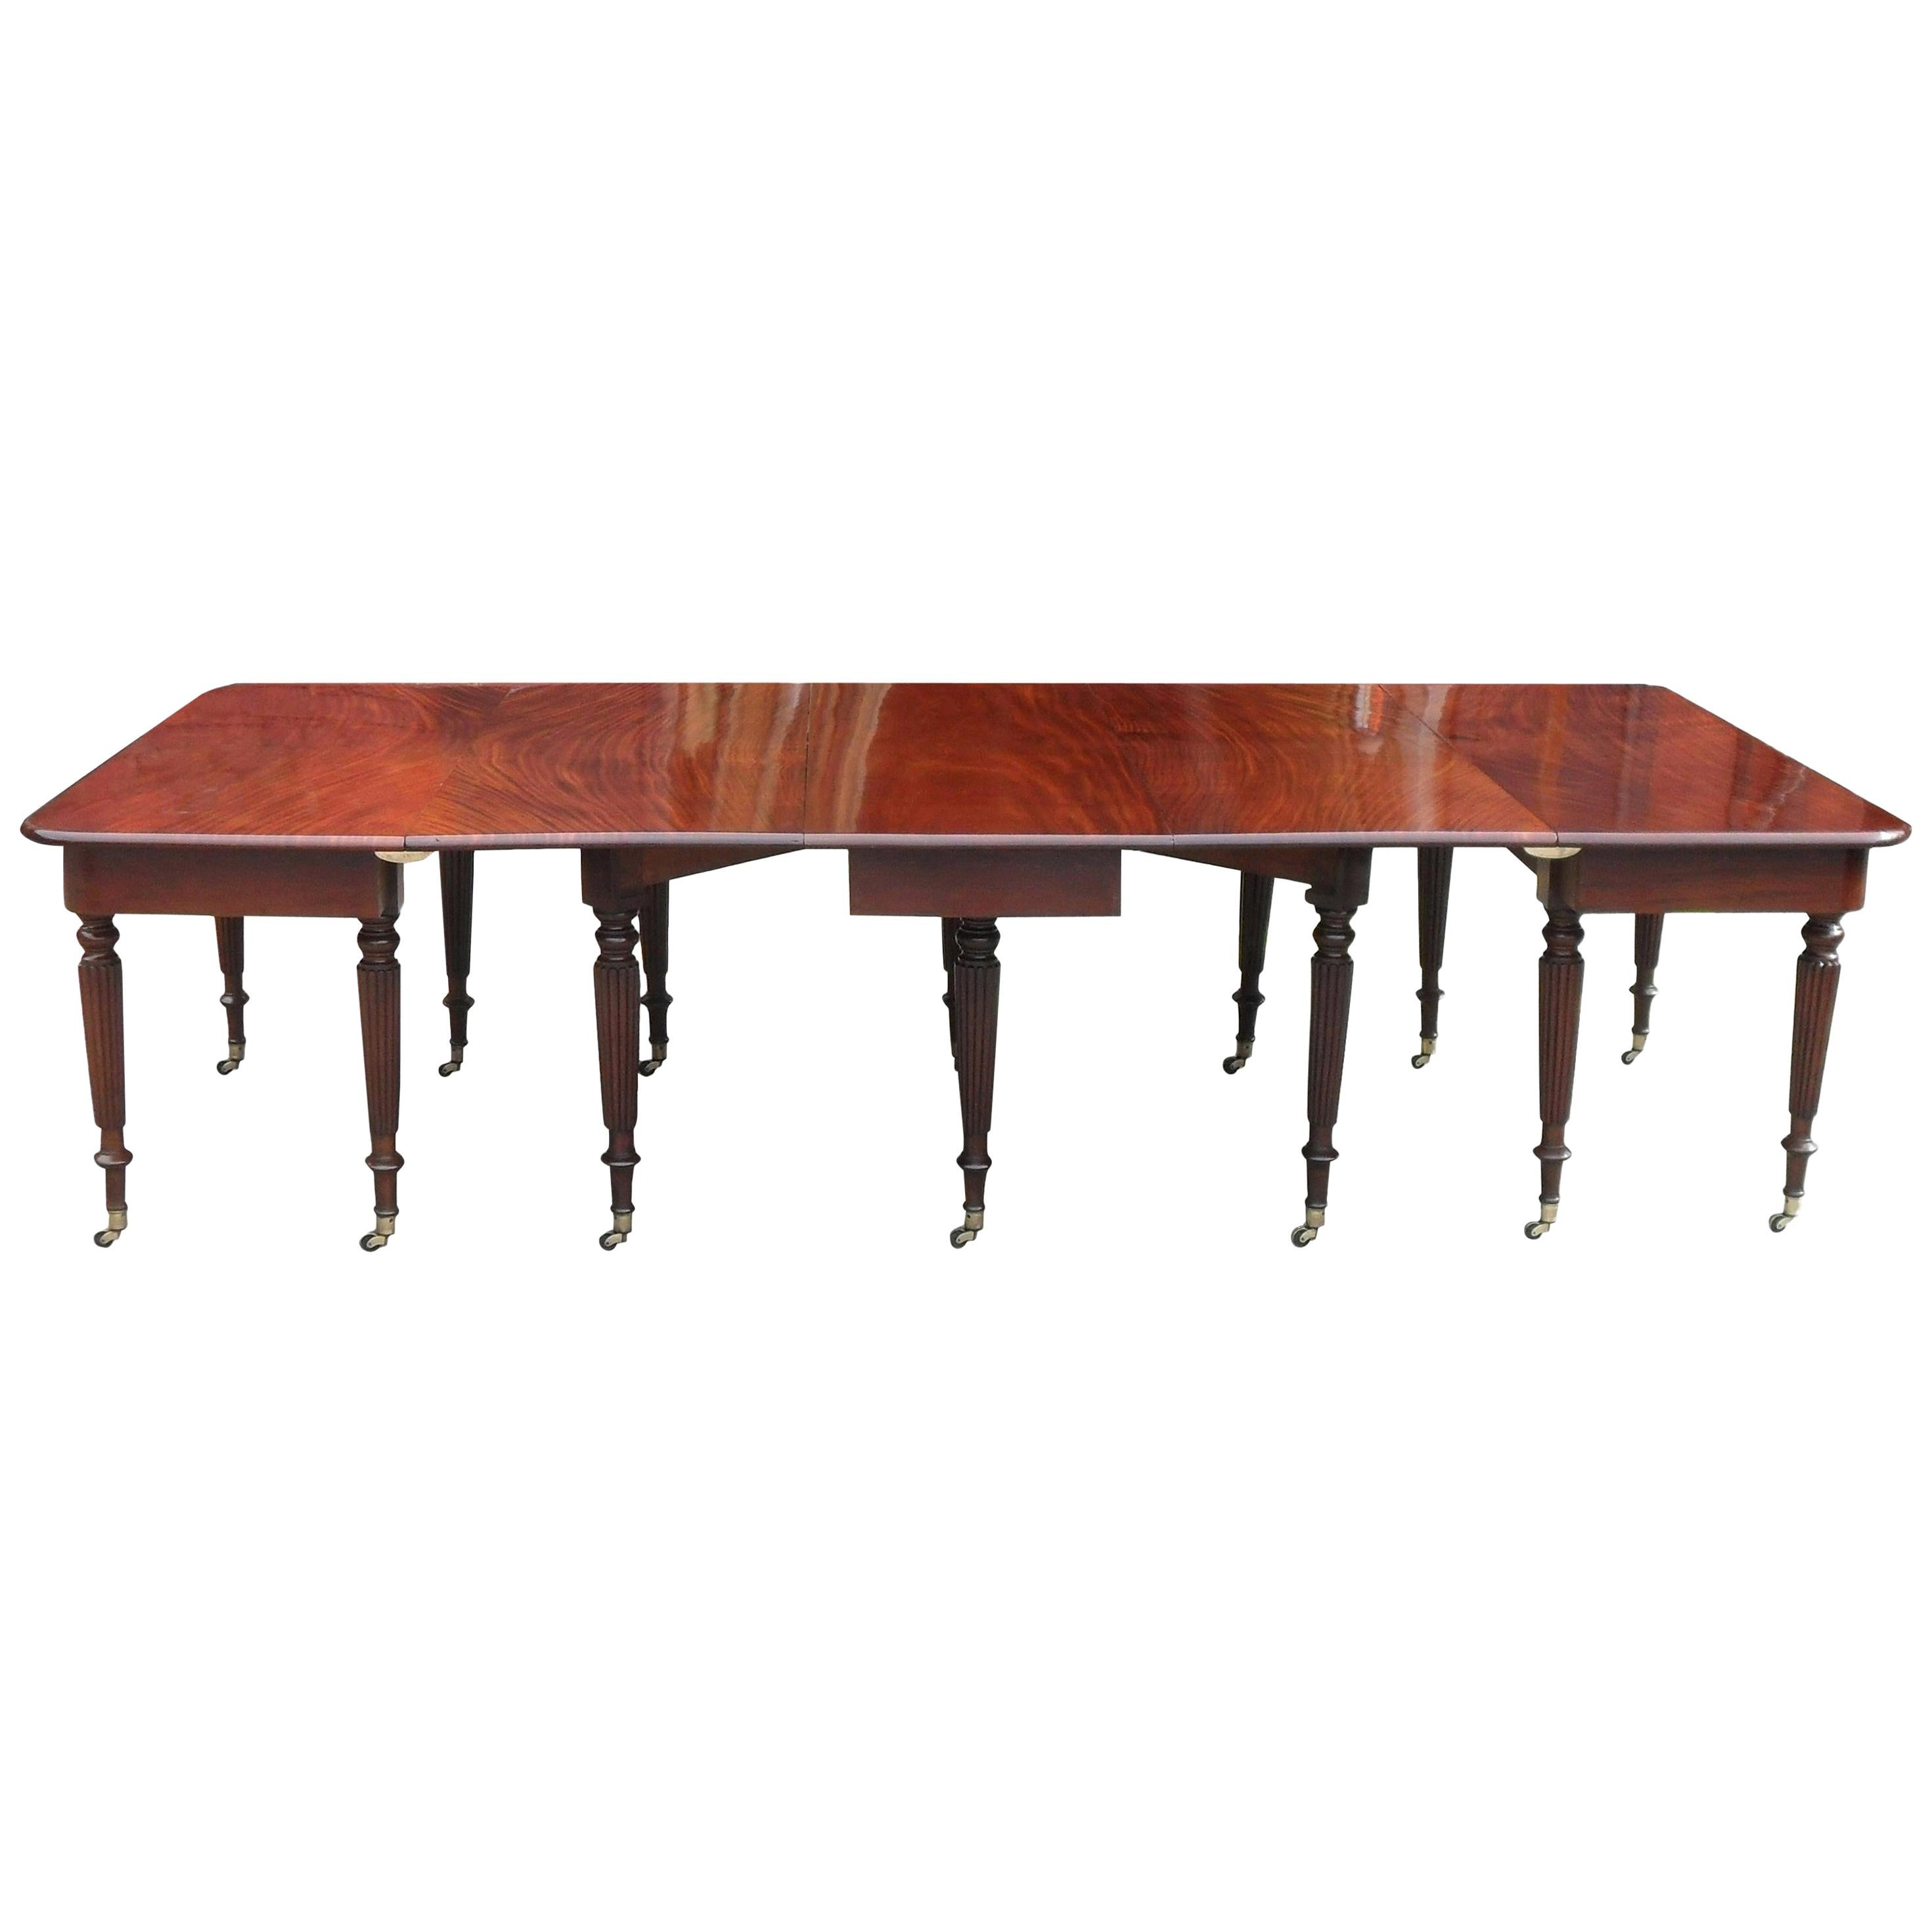 English George iv Figured Mahogany Extending Dining Table Attributed to Gillows For Sale